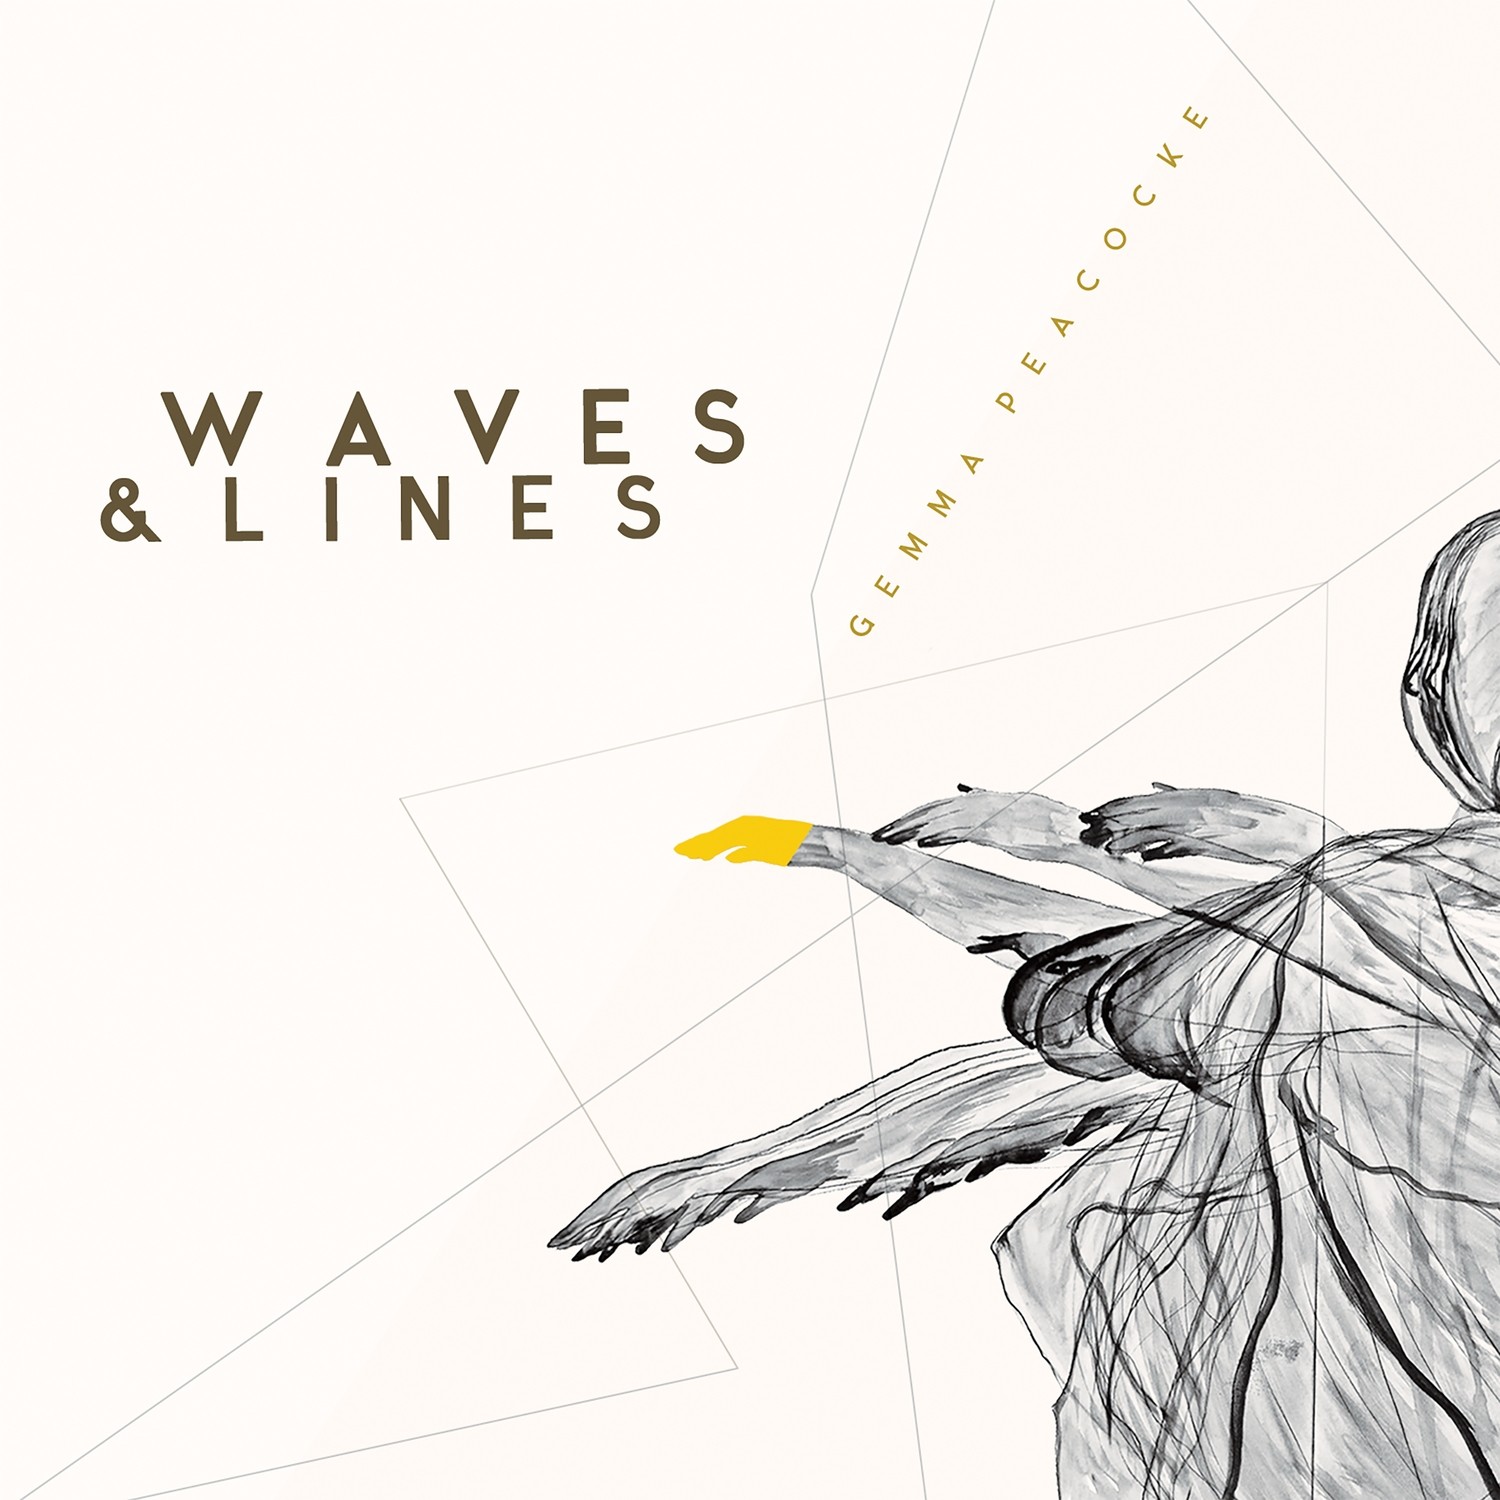 Waves & Lines (sheet music)